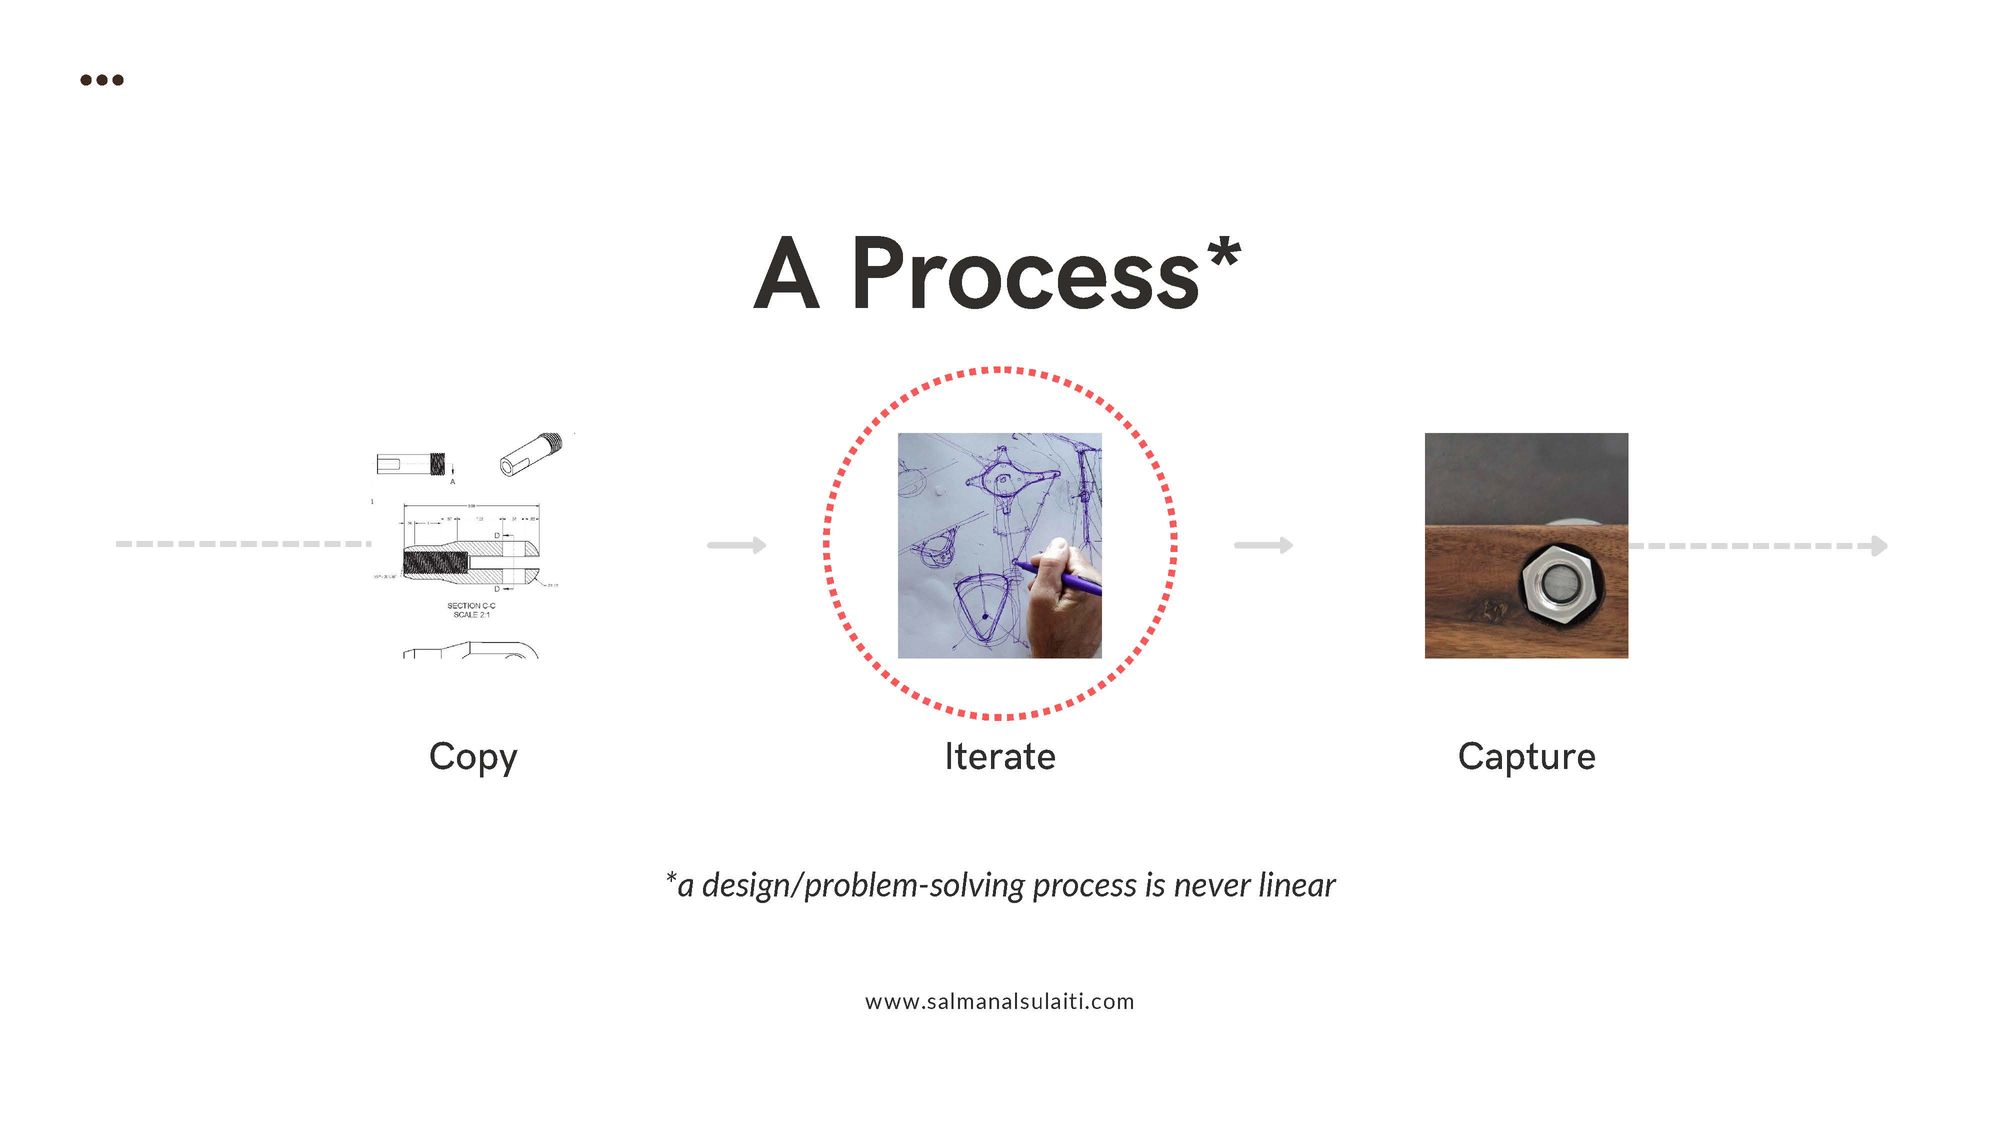 Copy, Iterate & Capture - 3 Steps for Any Maker